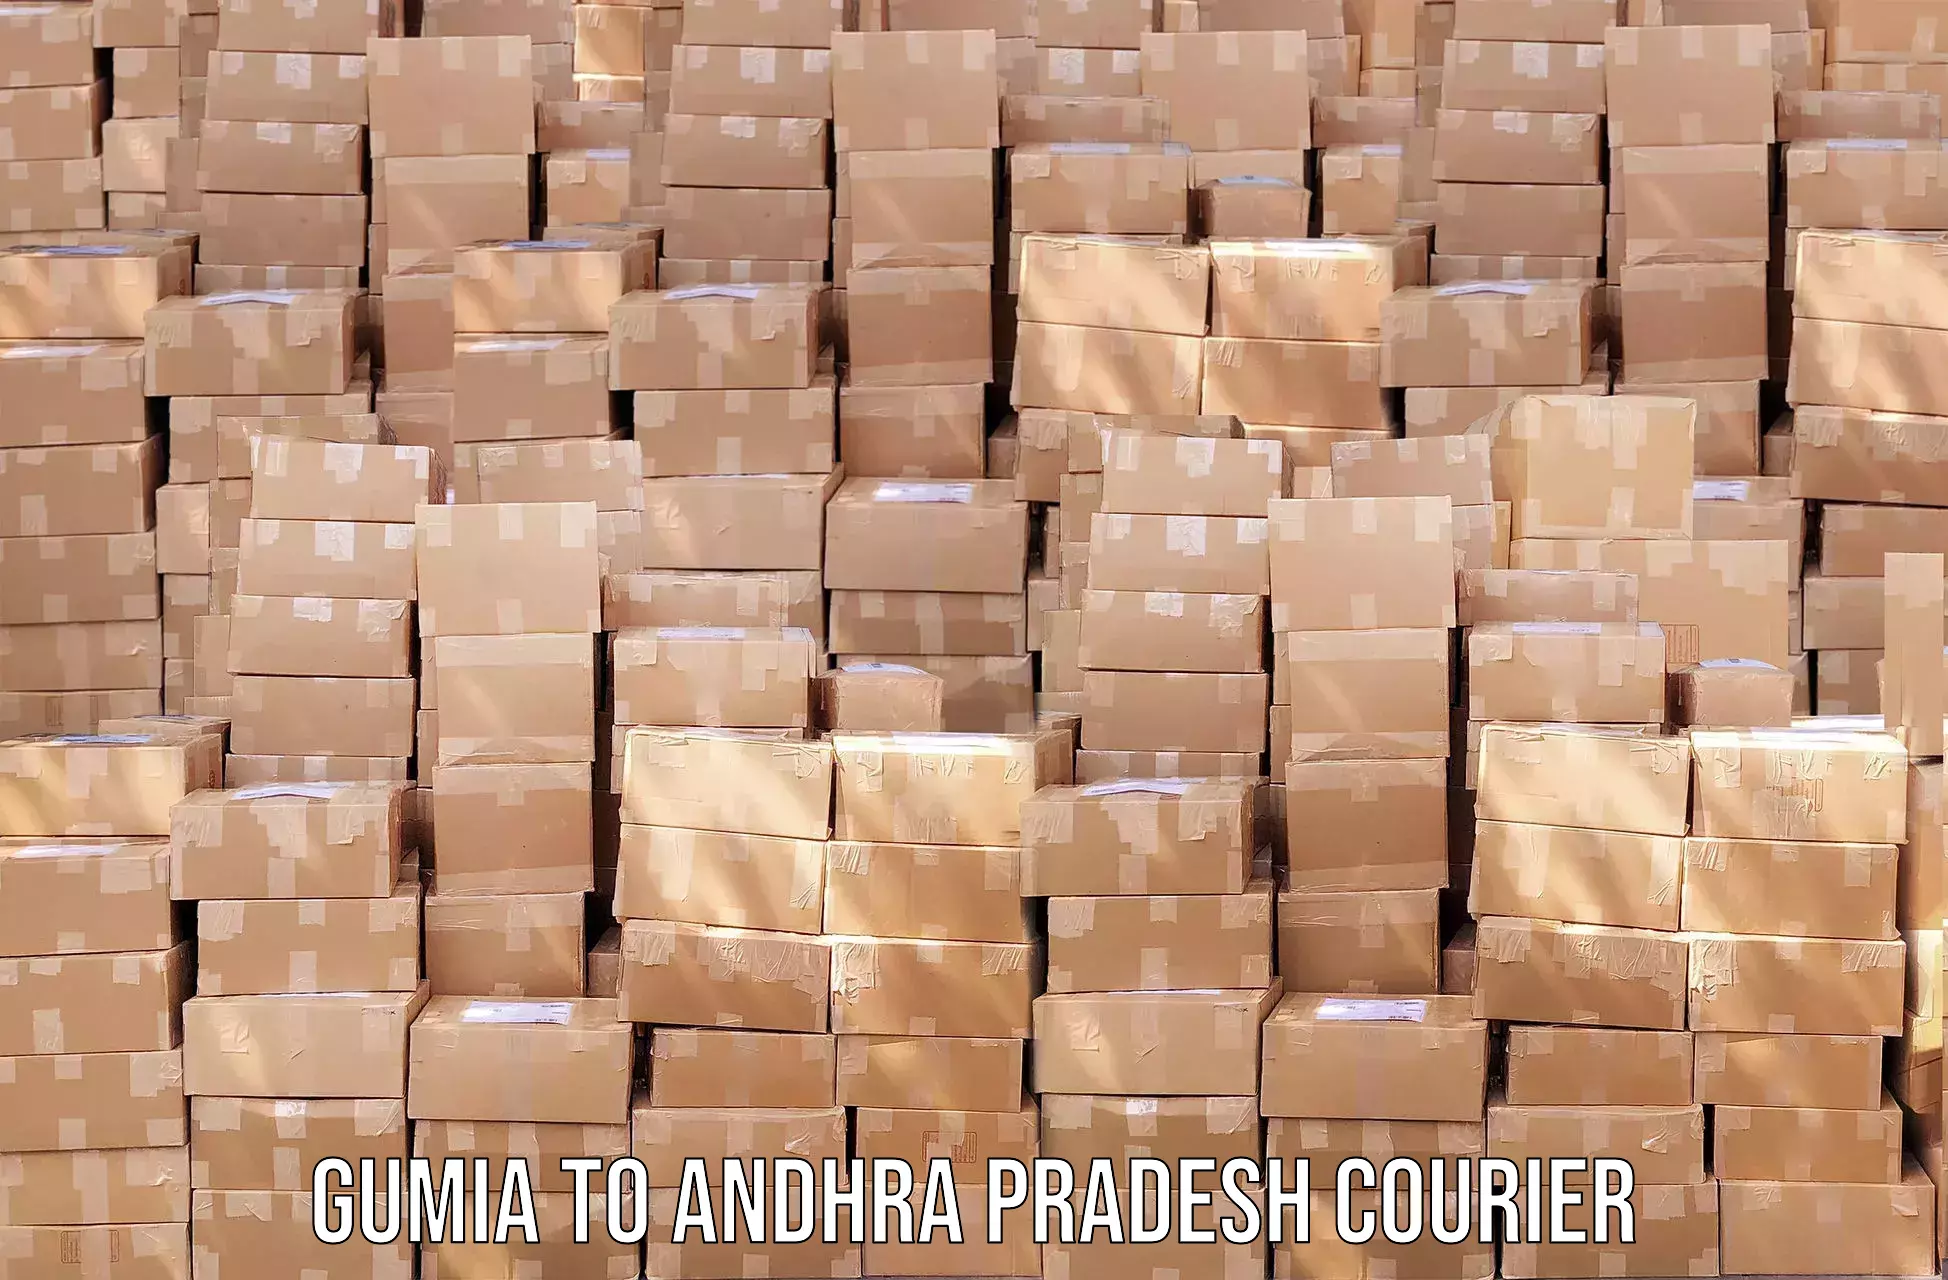 High-speed delivery Gumia to Tripuranthakam